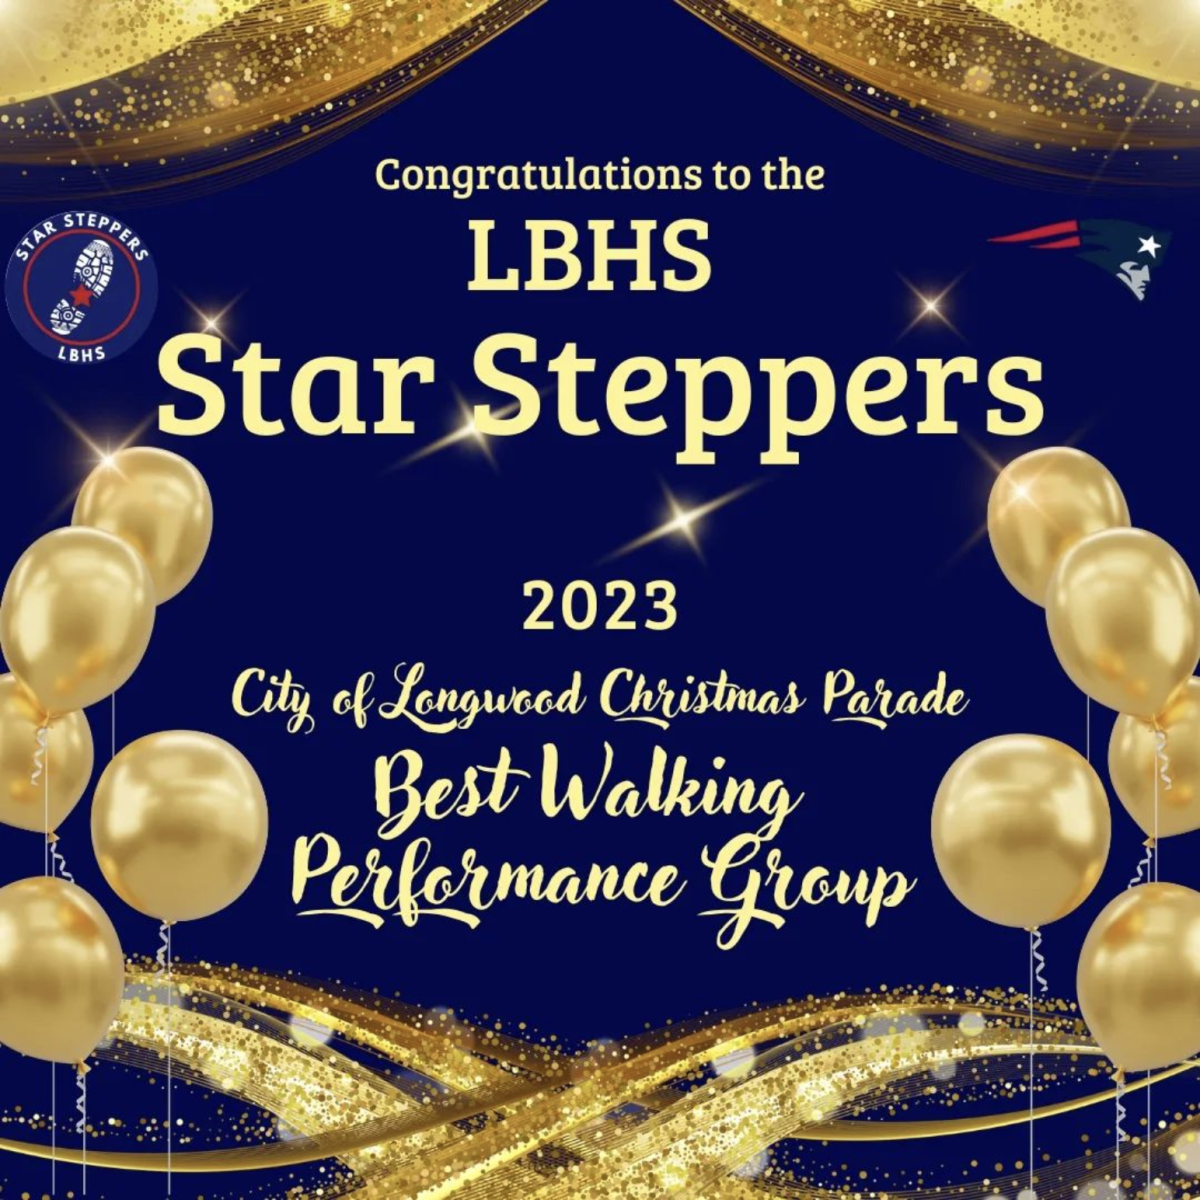 Posted on the Star Steppers instagram on December 14th, 2023. The award was presented in response to the impressive performance.